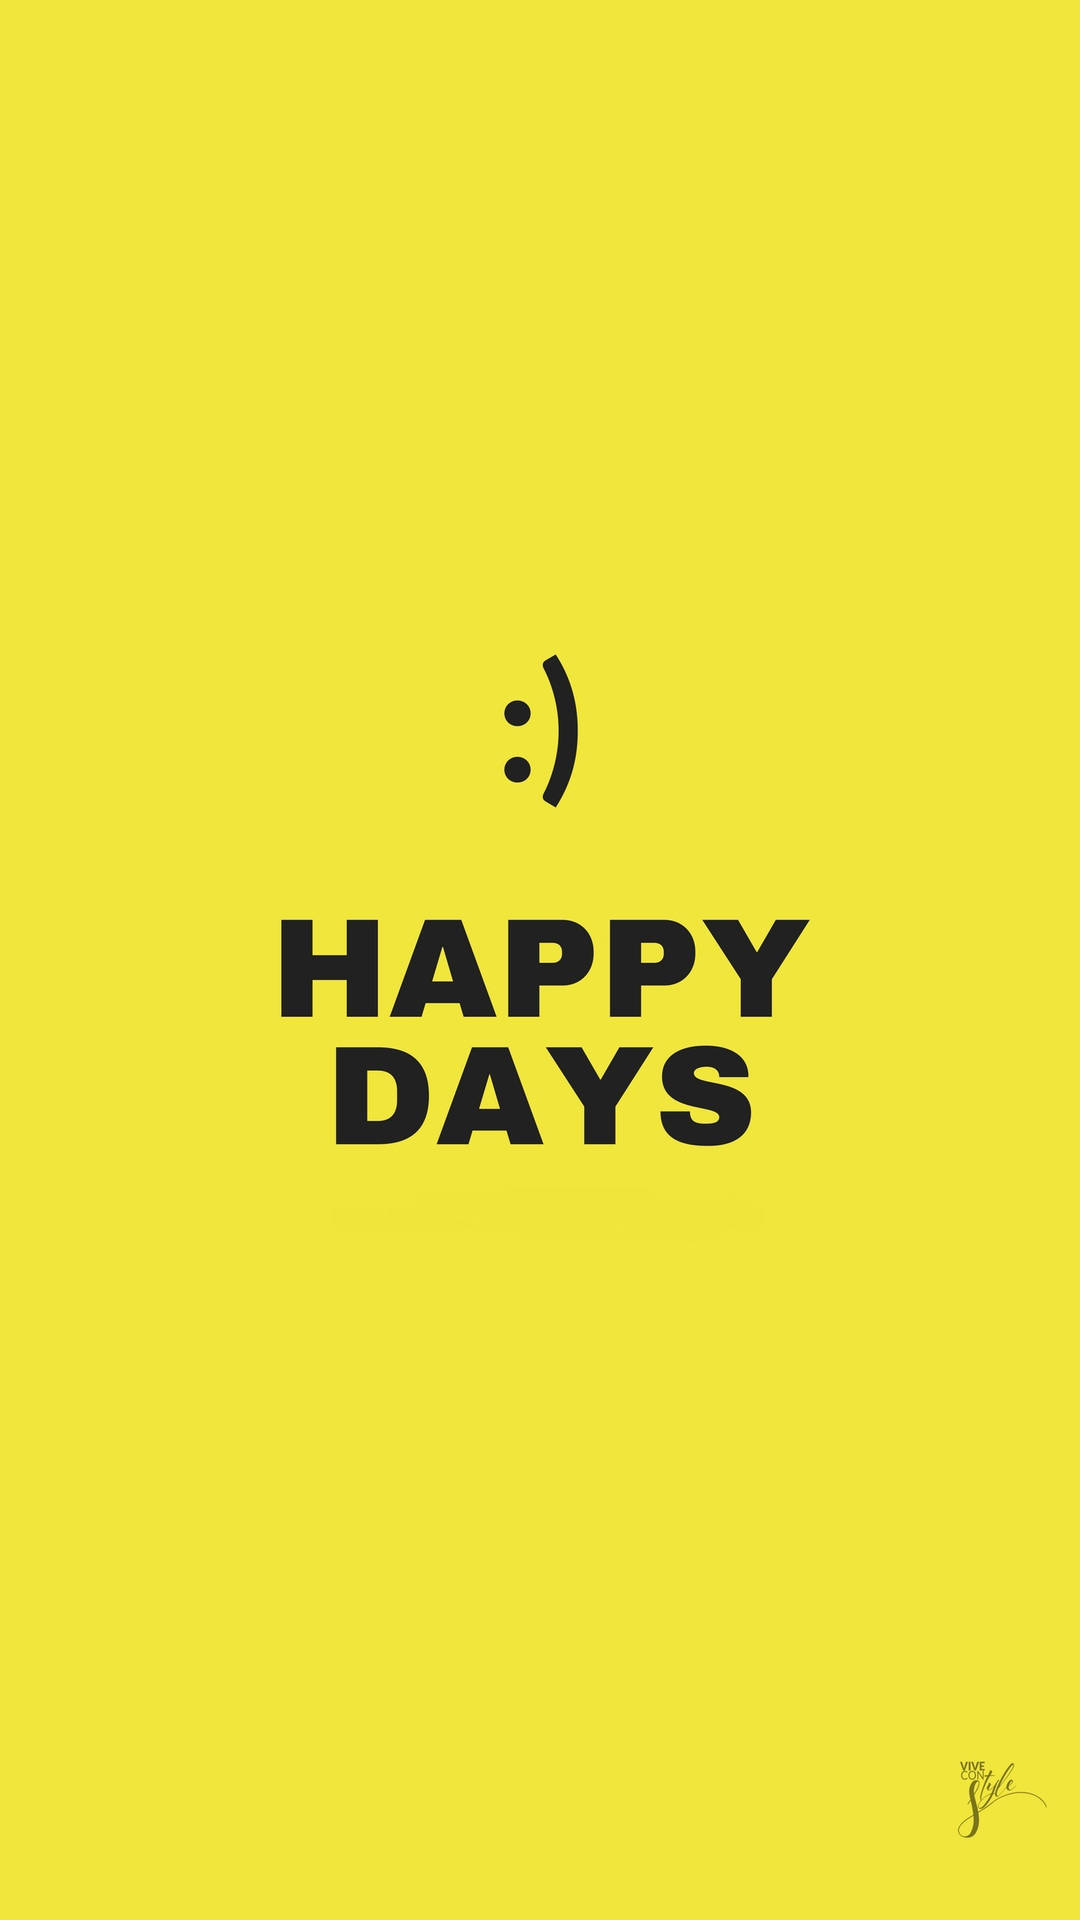 Happy Days For Cute Yellow Background Wallpaper